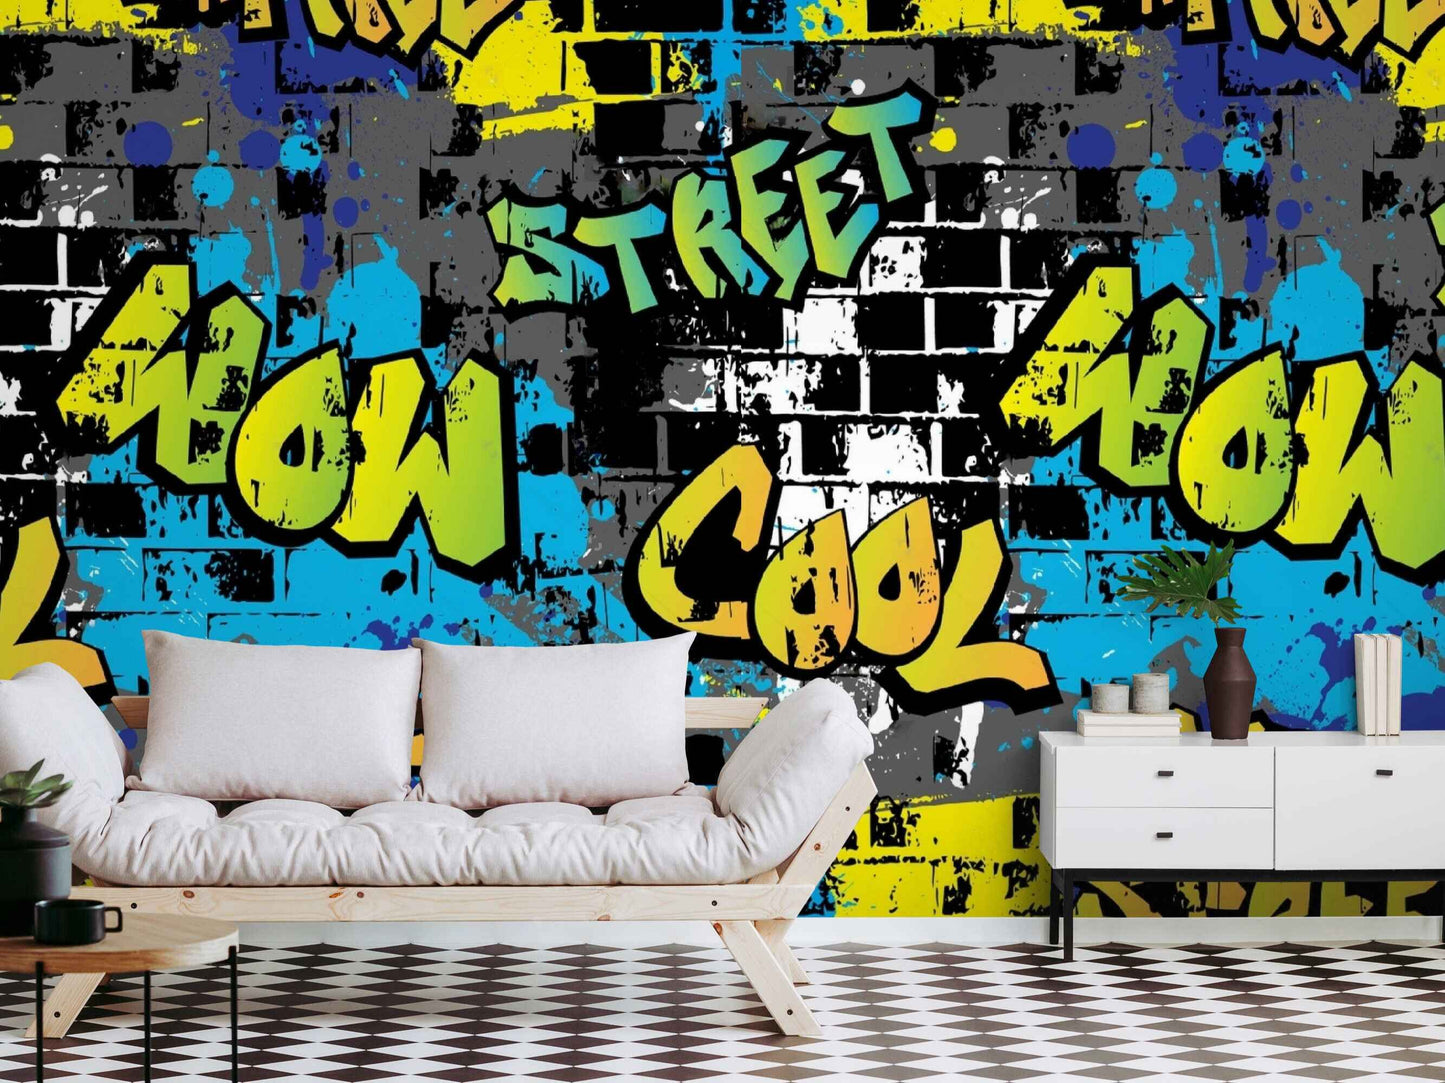  An image of a wall covered in a graffiti mural with bold and abstract designs, shapes, and lettering in various colors such as blue, green, and yellow. The mural is hand-painted or printed on the wall, covering a significant portion of the surface. The artwork is inspired by street art and adds a raw and edgy vibe to the interior decor. The mural can be a focal point of a room, adding character and personality to the space.